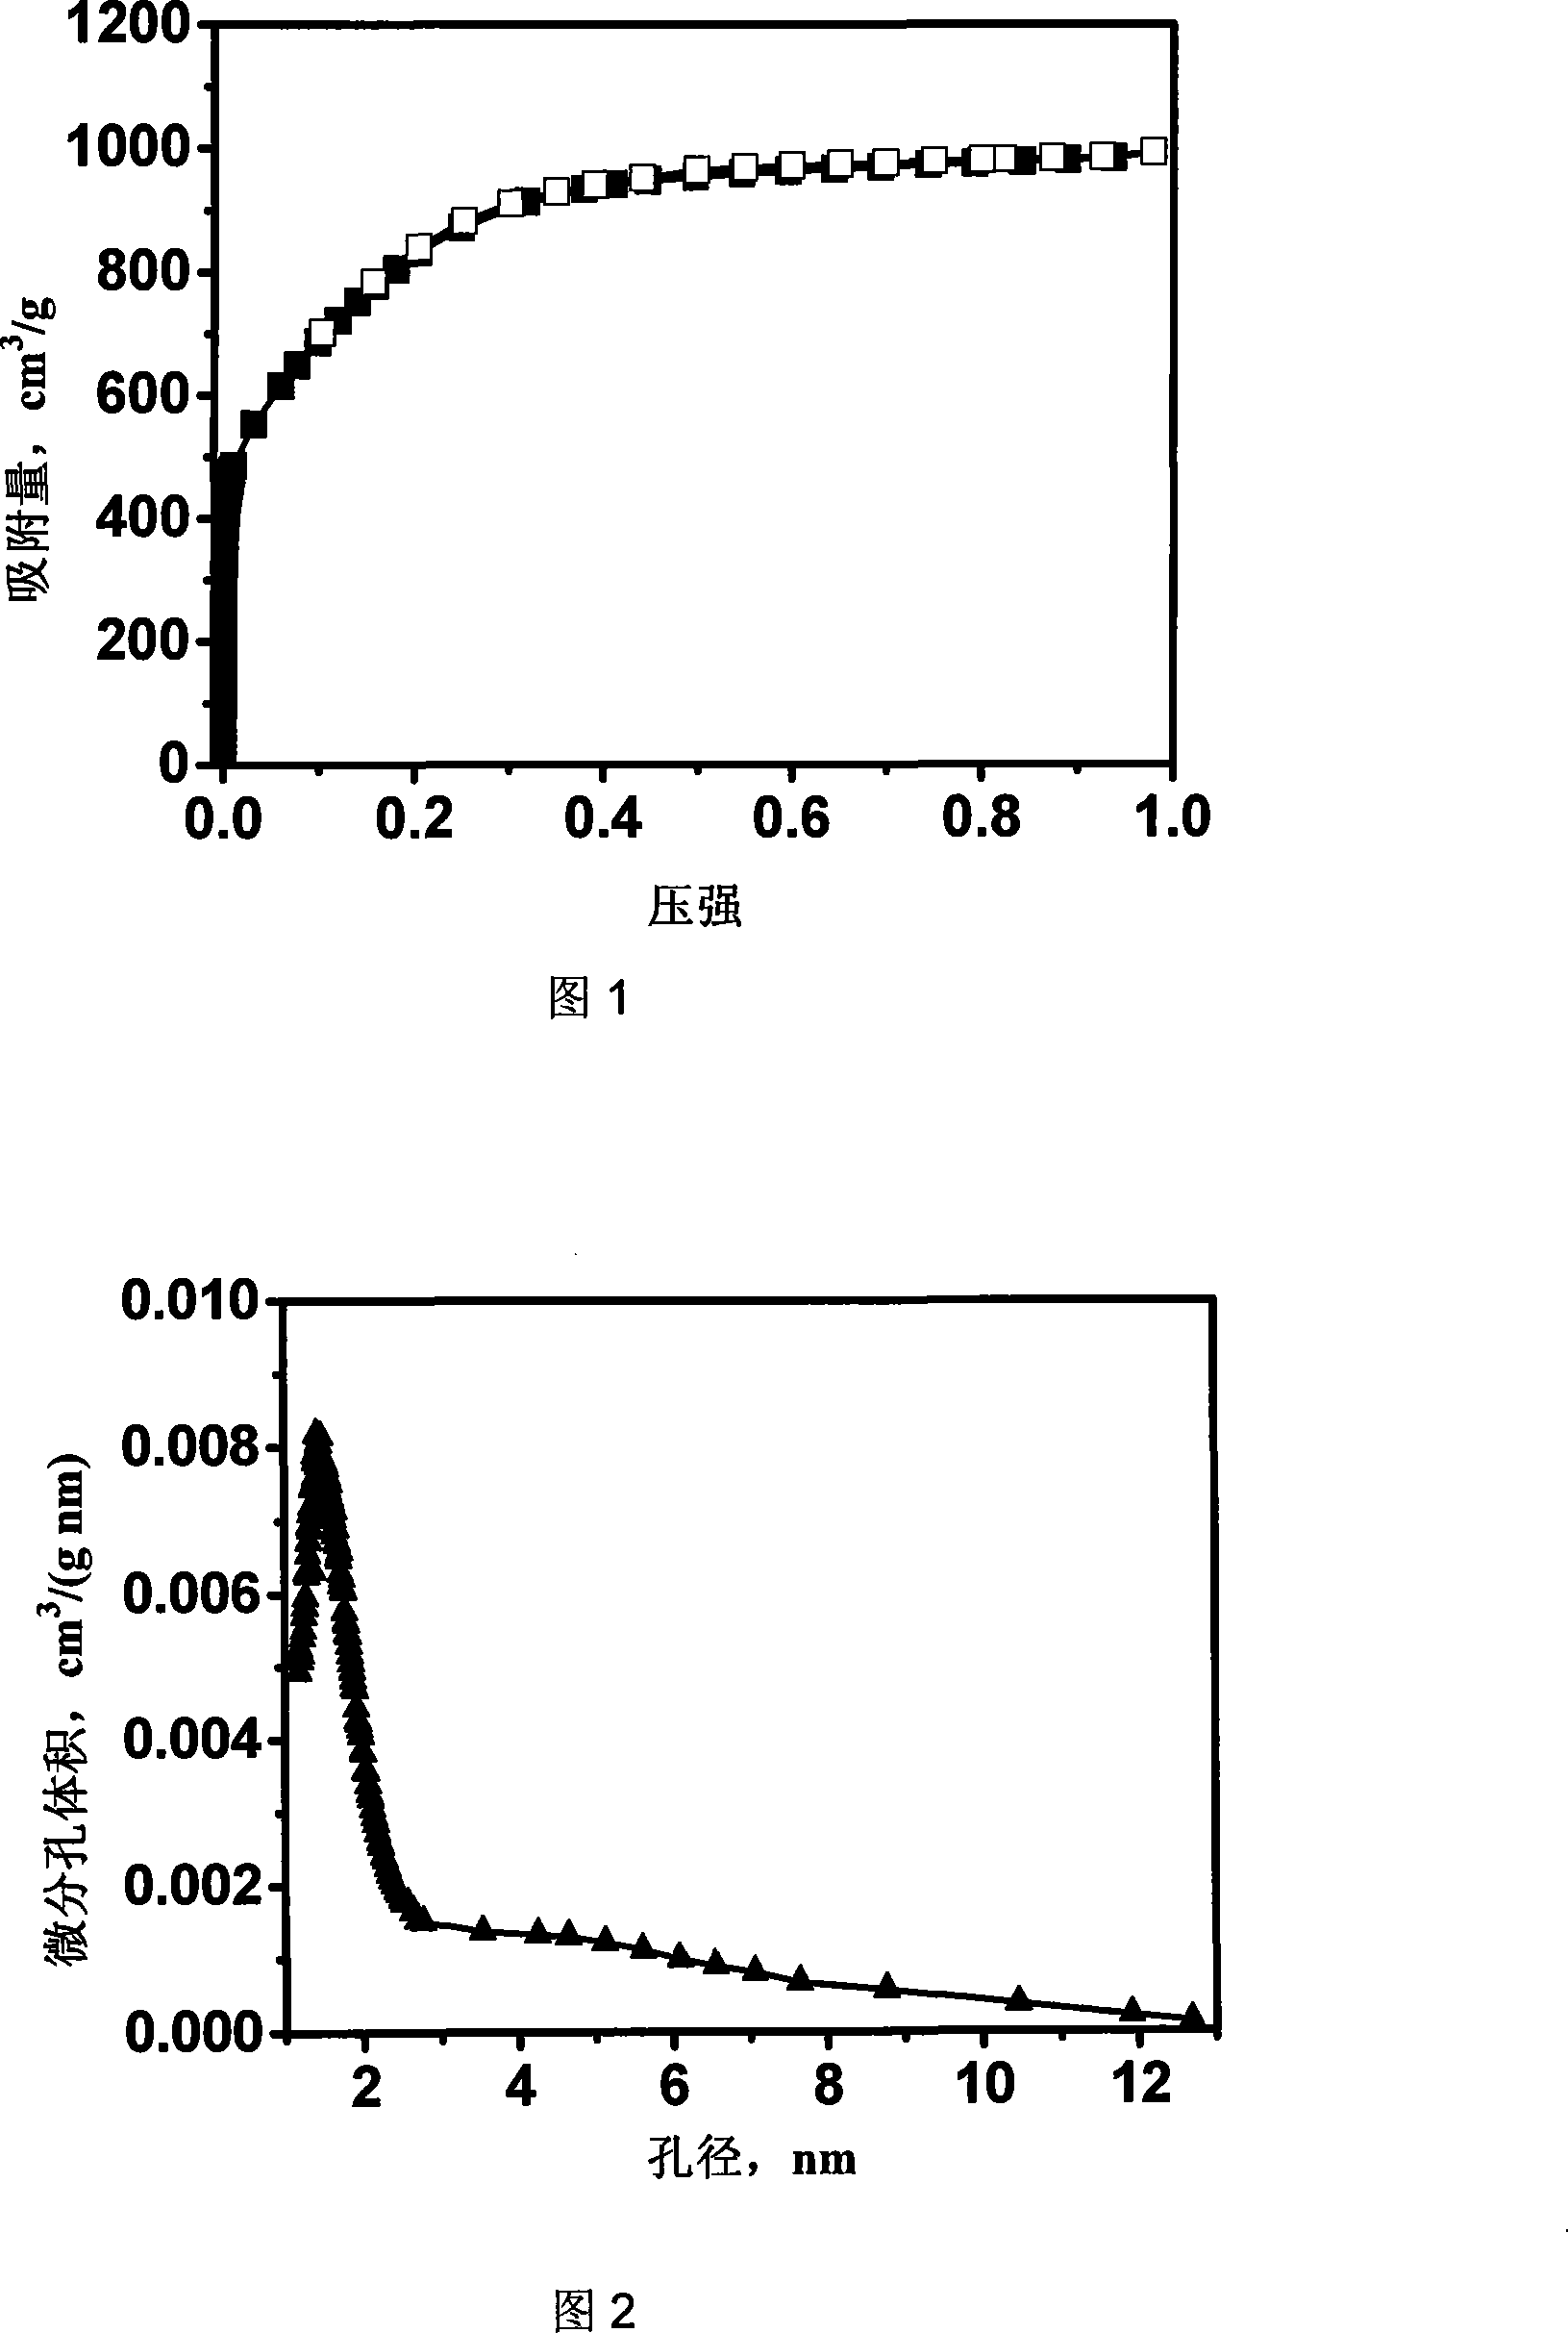 High specific surface area and narrow pore distribution porous carbon material